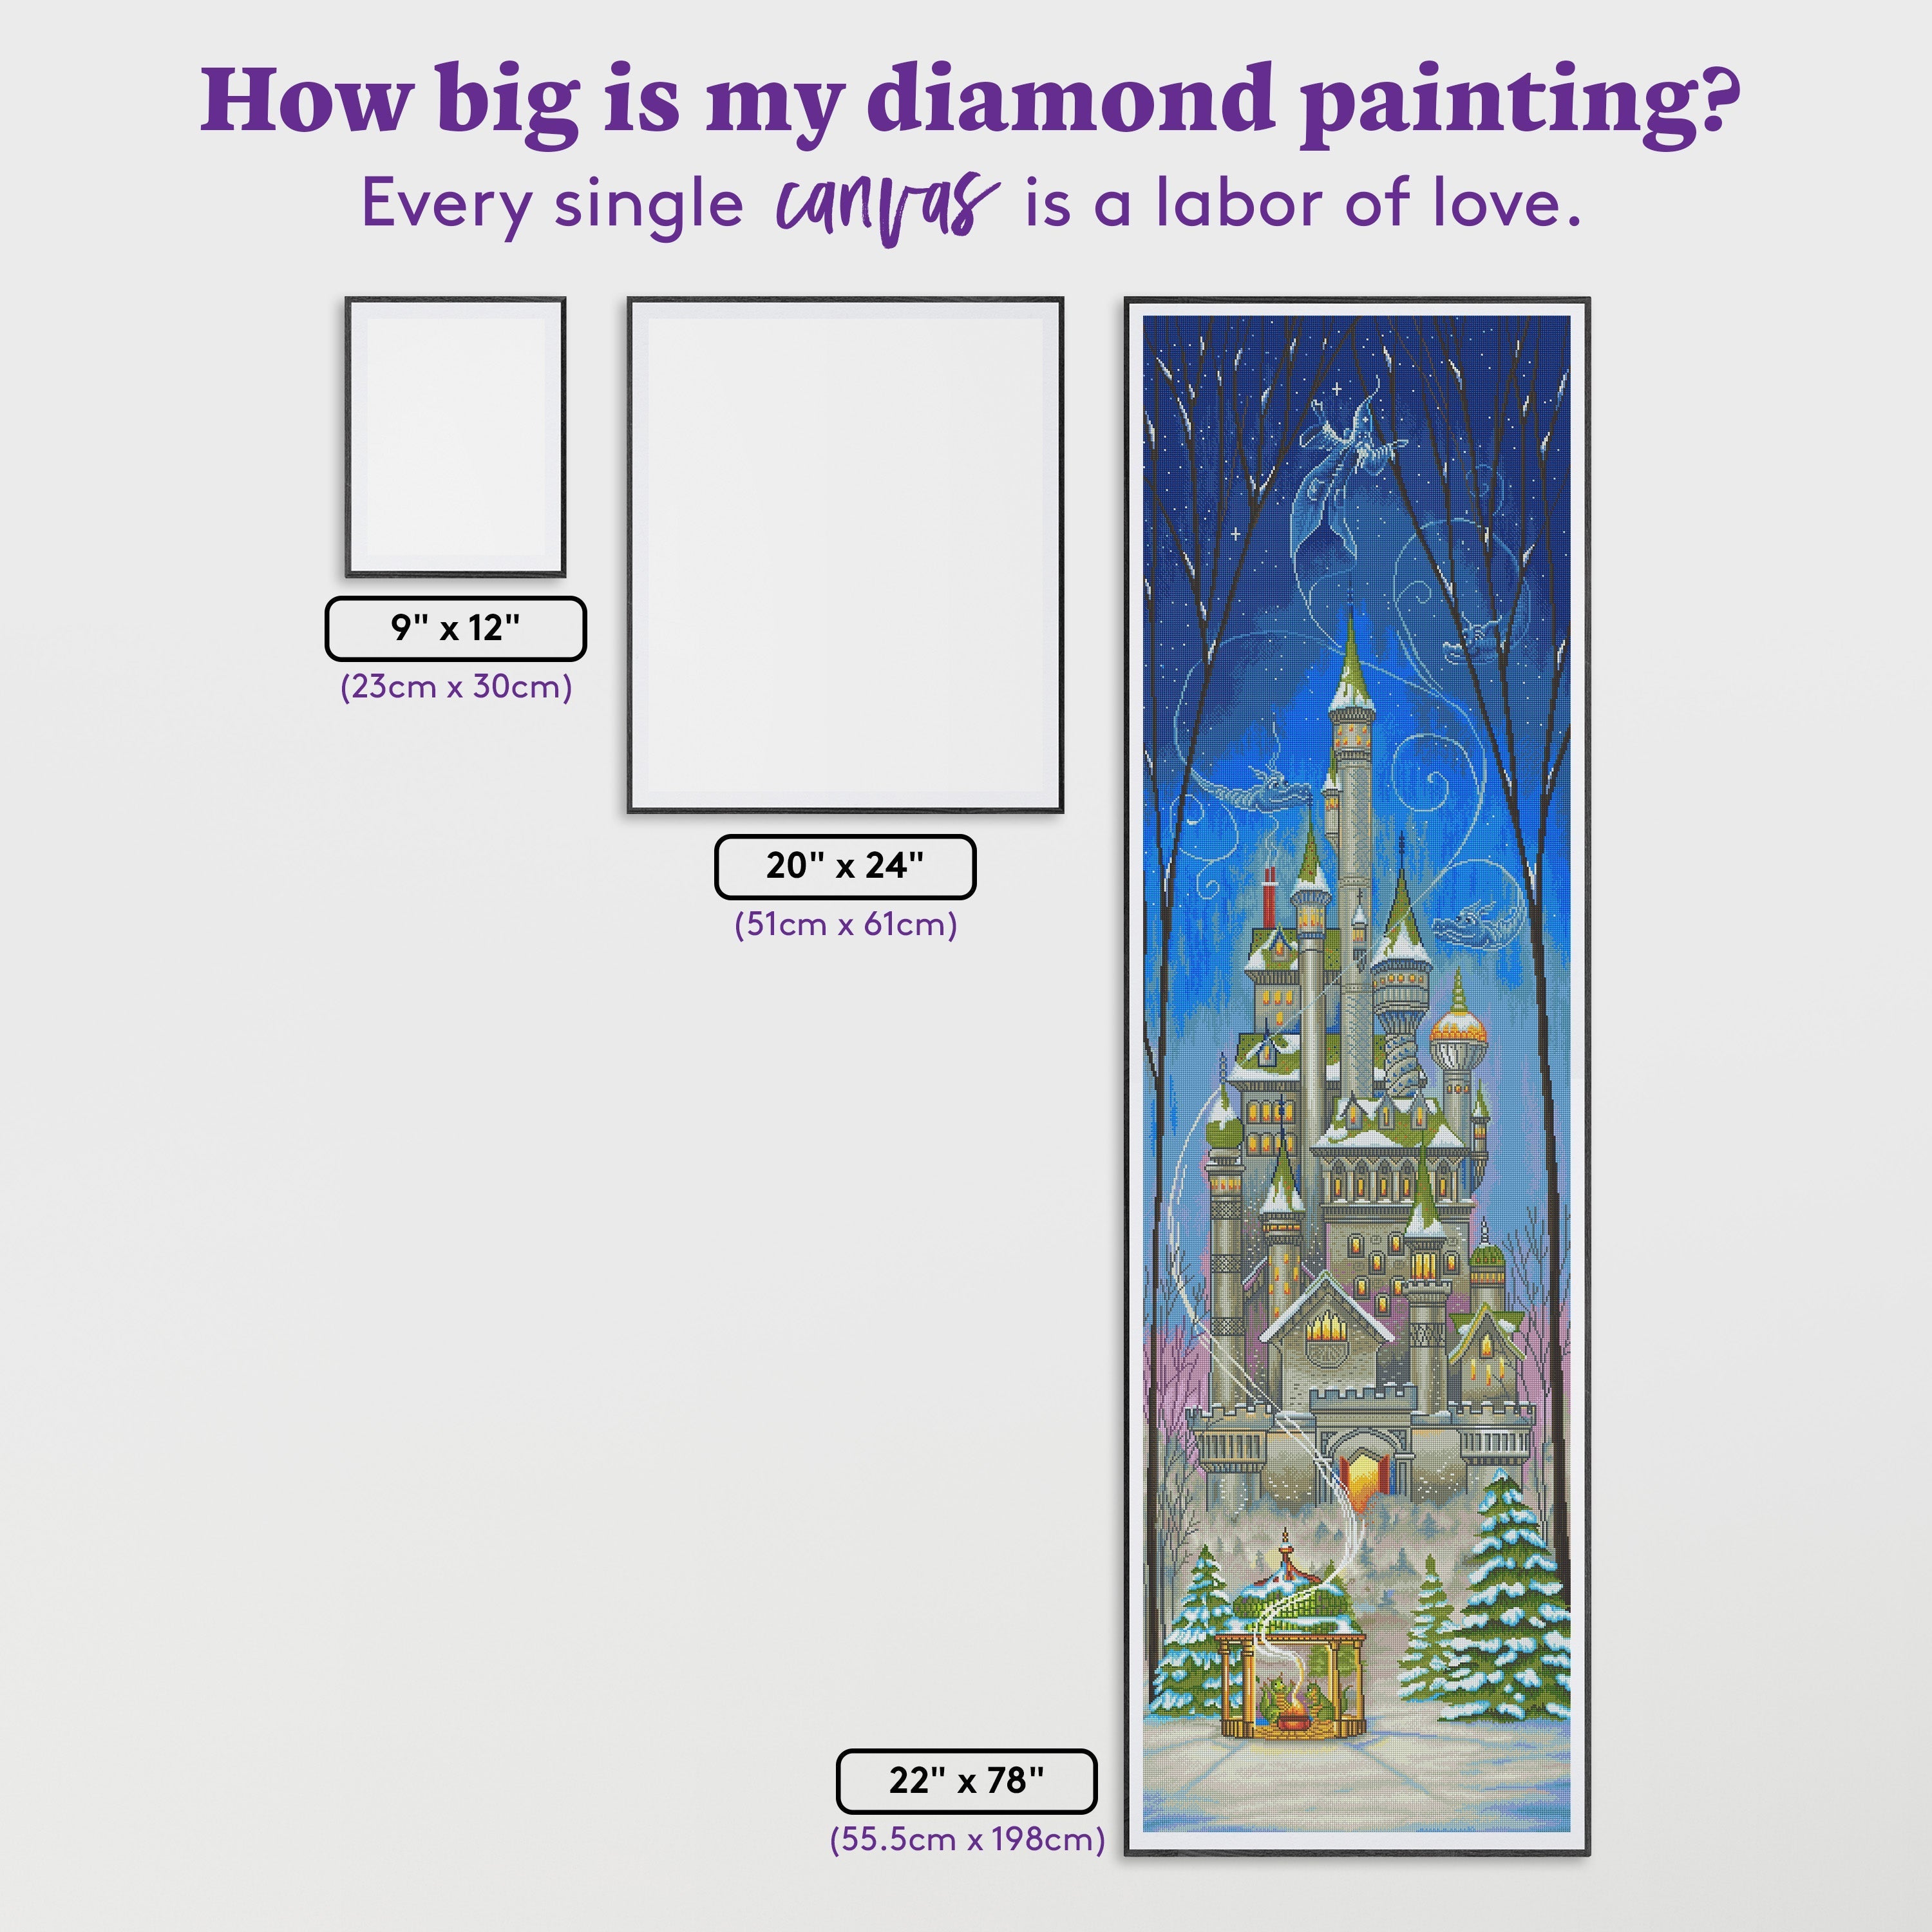 Sorcerer Mickey Diamond Painting Kits for Adults 20% Off Today